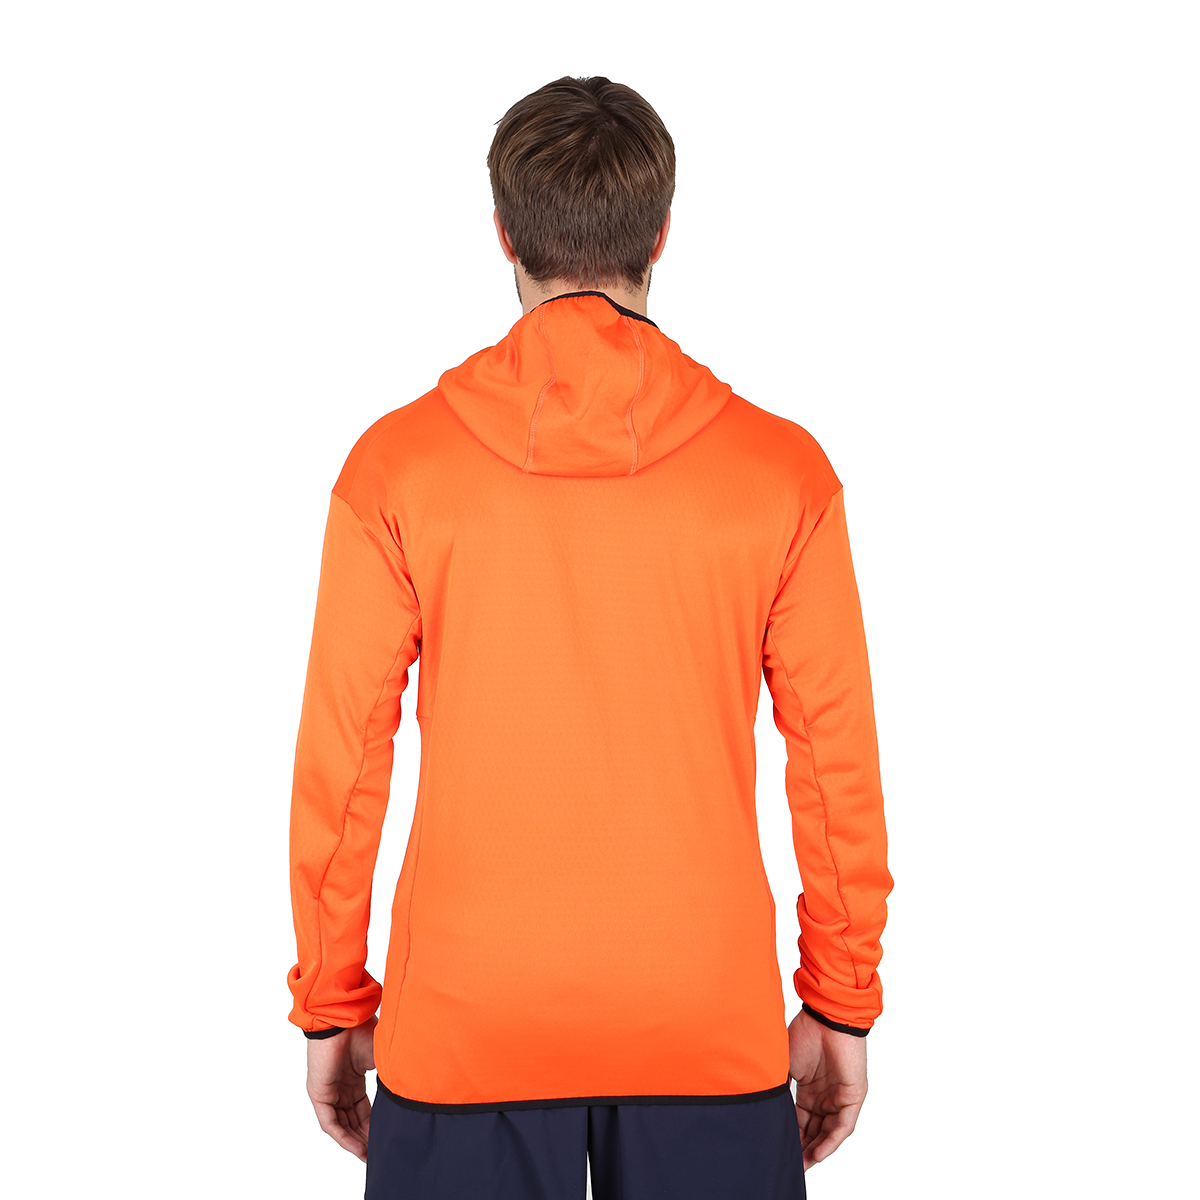 Campera Outdoor adidas Terrex Tech Flooce Hiking Hombre,  image number null